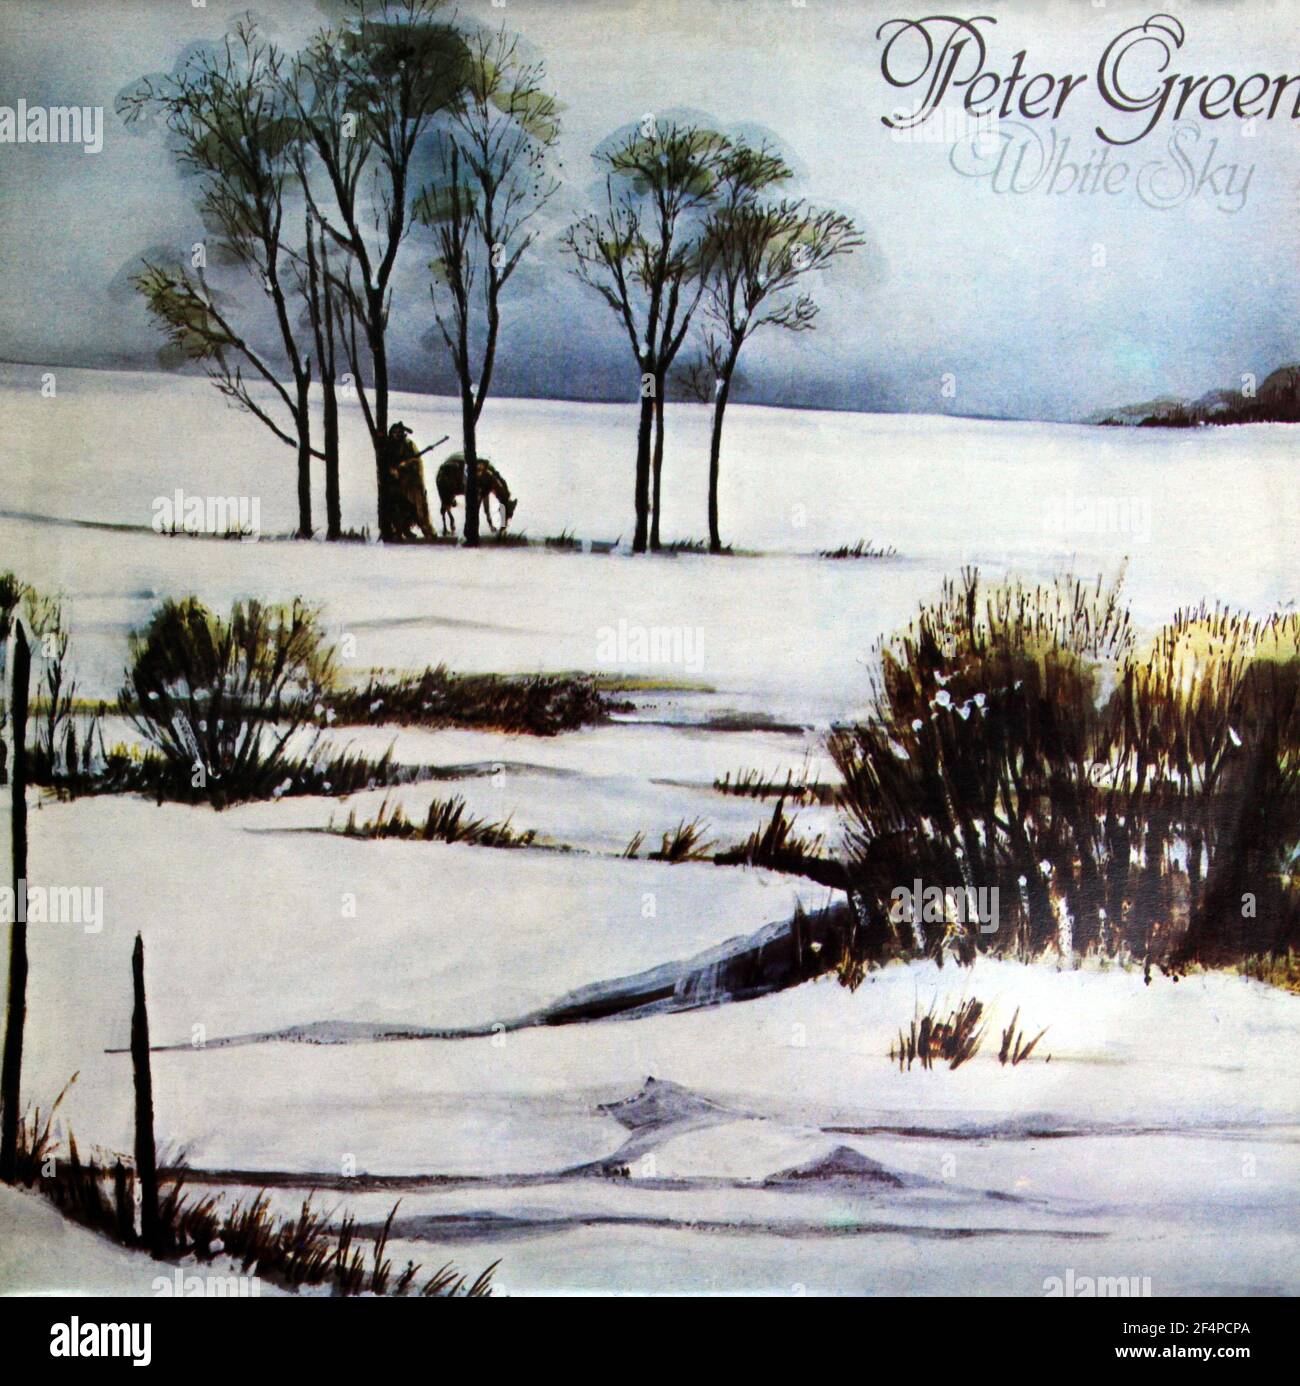 Peter Green: 1982. LP front cover: White Sky Stock Photo